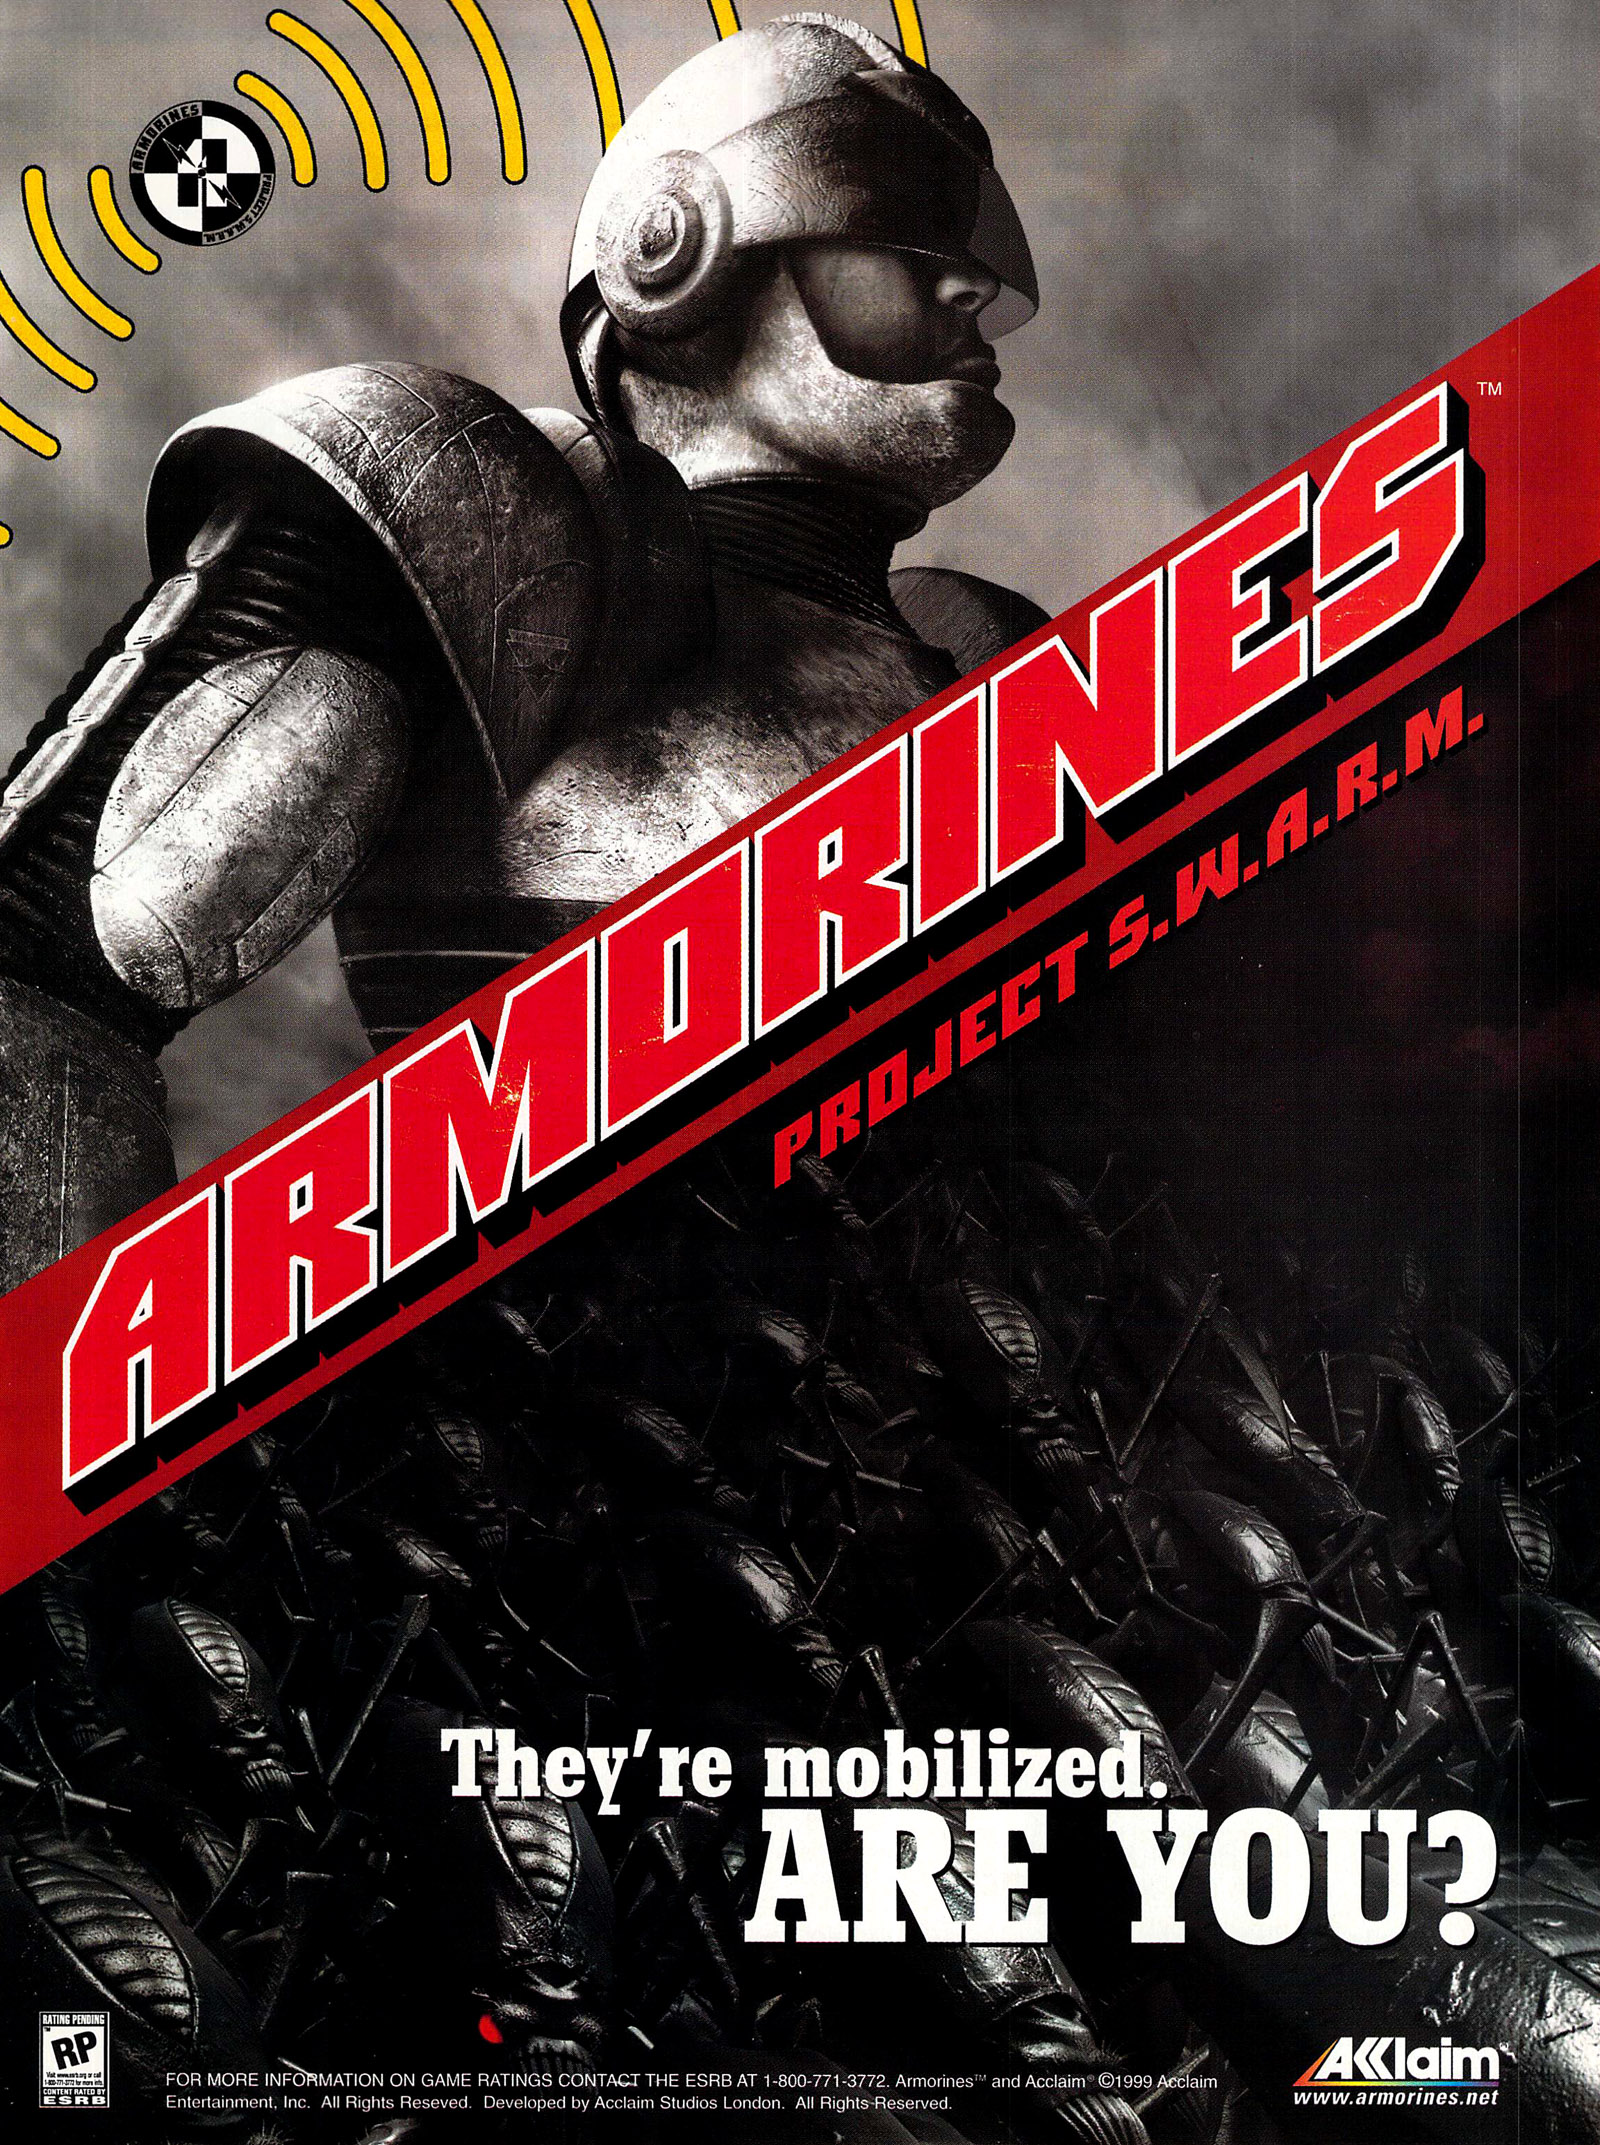 You got Starship Troopers in my Turok, you derivative bastards. Armorines: Project S.W.A.R.M. was based on the Armorines comic created by Valiant before Acclaim bought them out. While the original […]